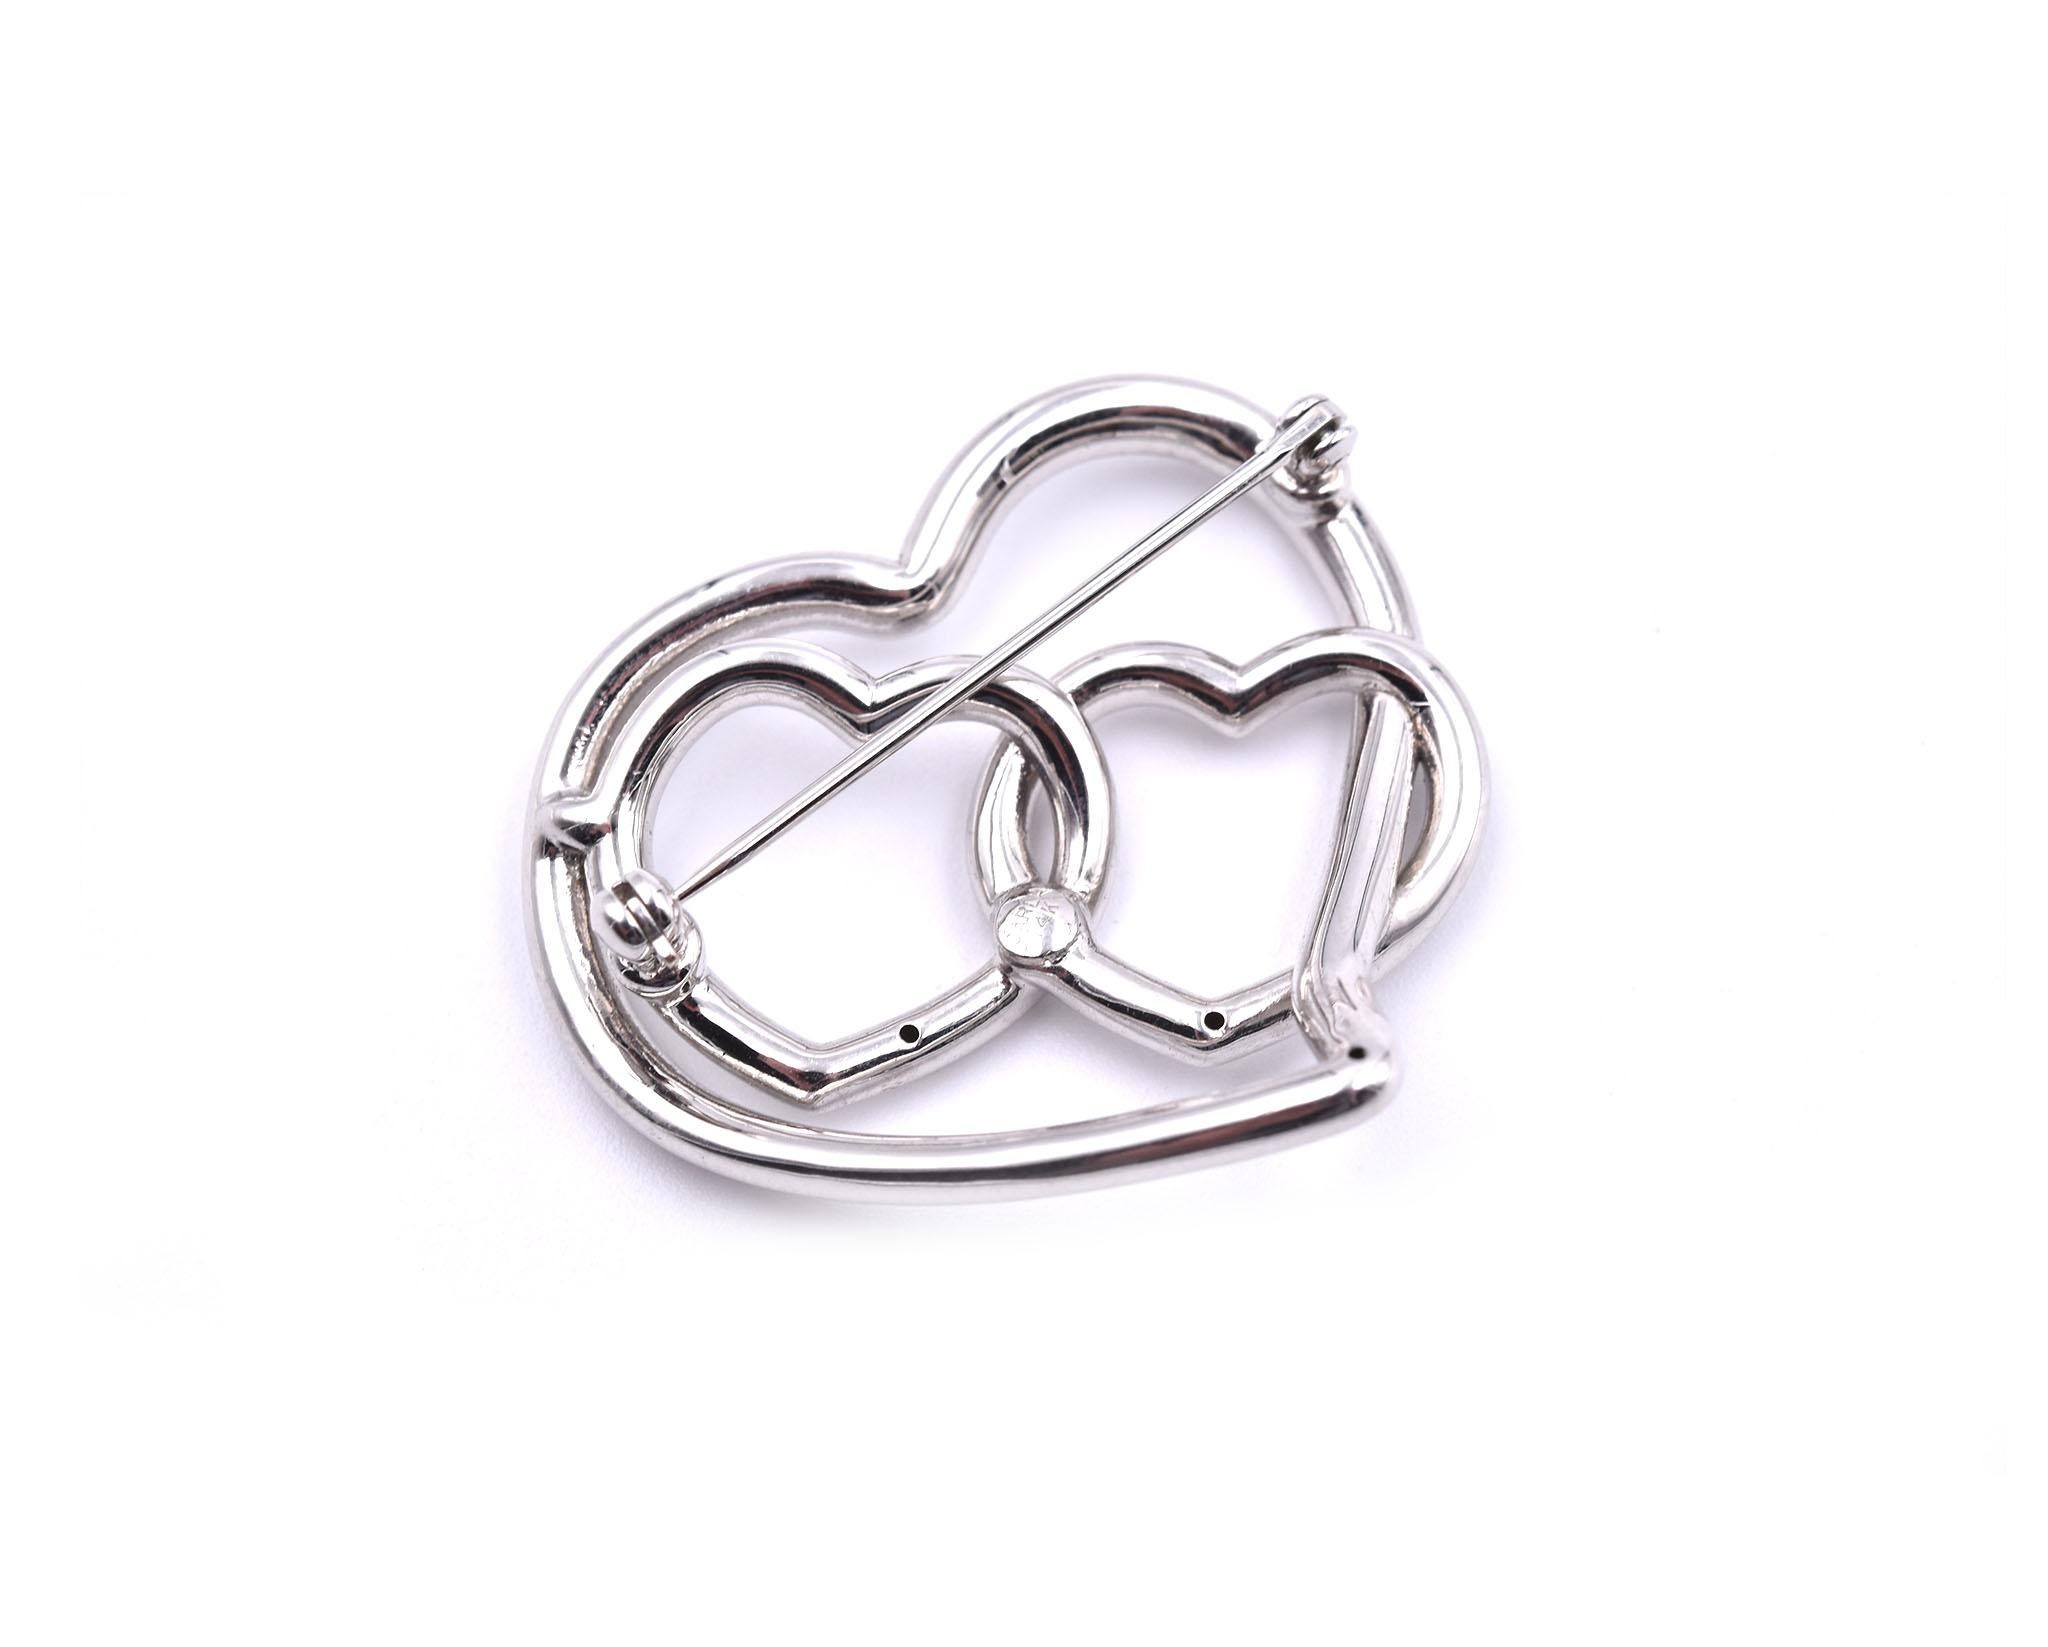 Designer: custom design
Material: 14k white gold
Dimensions: pin measures 32.81mm by 34.38mm
Weight: 3.77 grams
